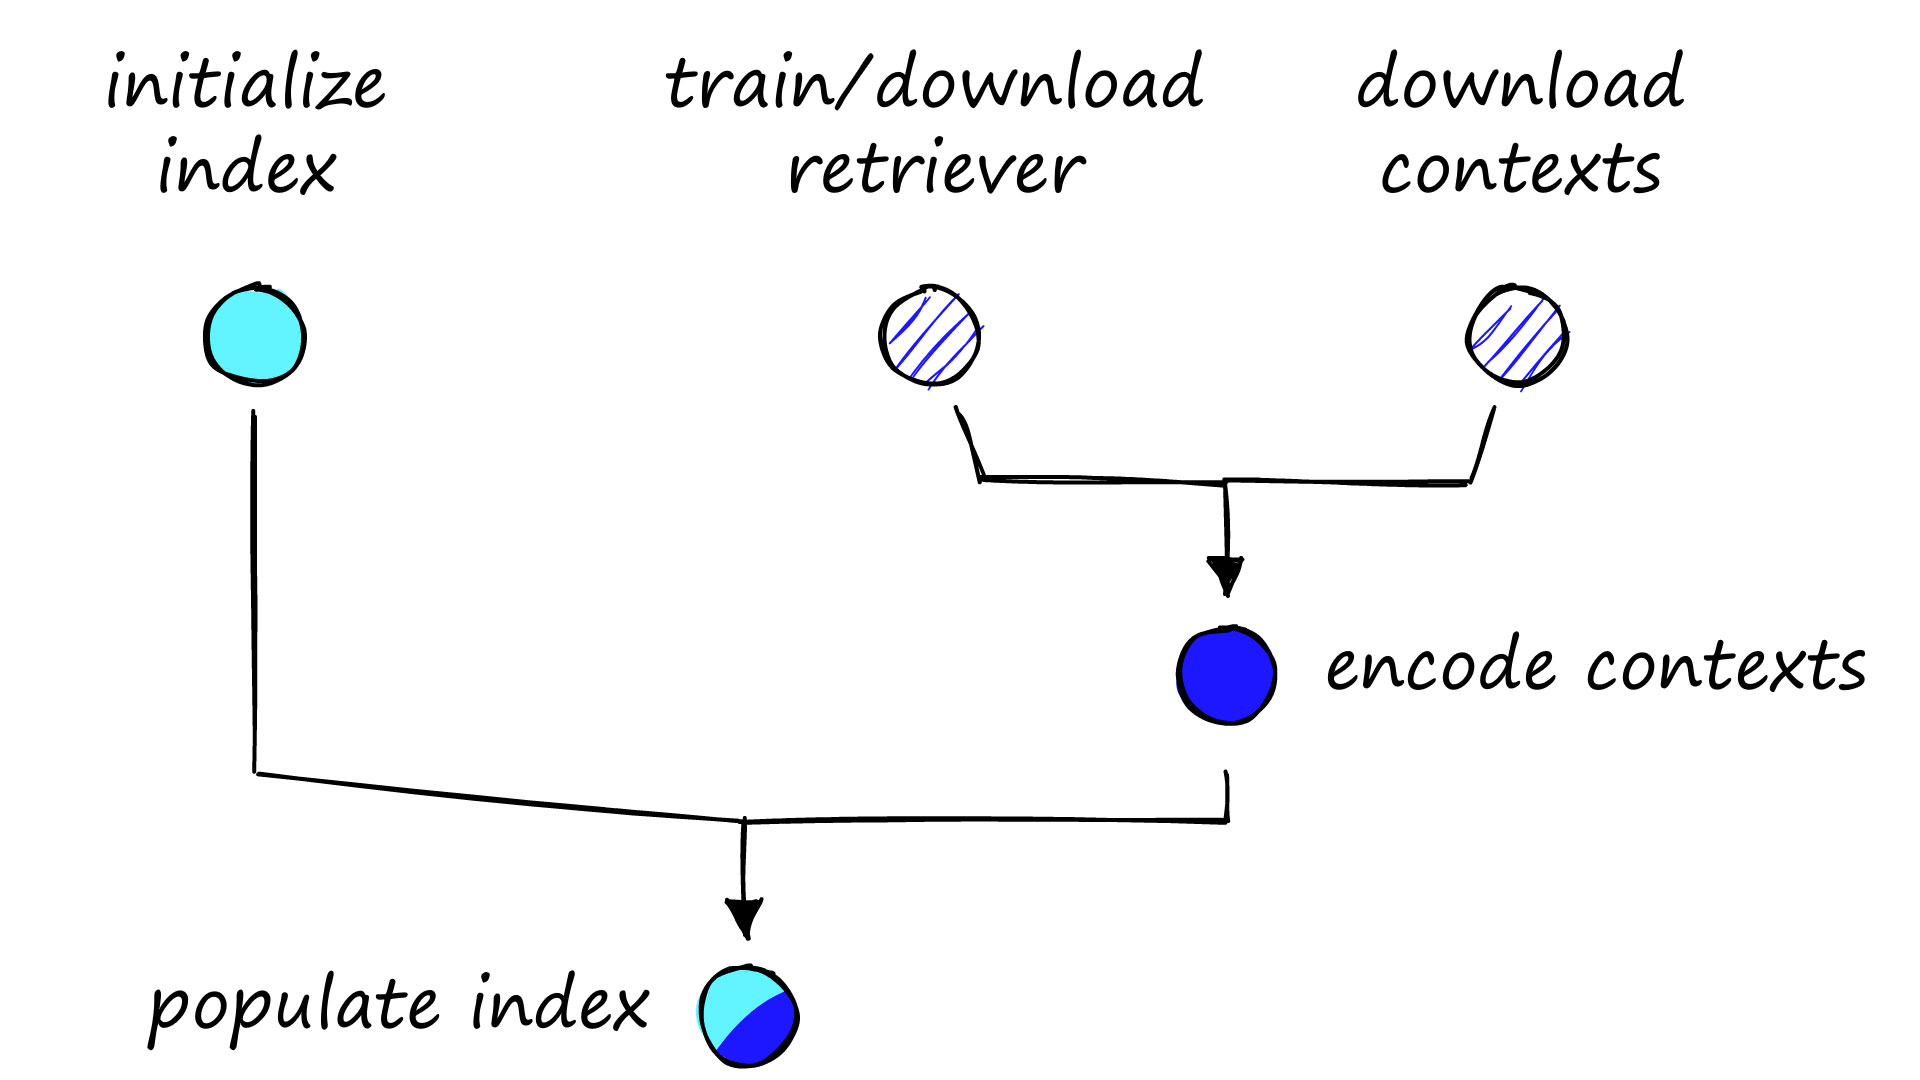 Steps from retriever and context preparation (top-right) that allow us to encode contexts into context vectors. After initializing a vector database index, we can populate the index with the context vectors.